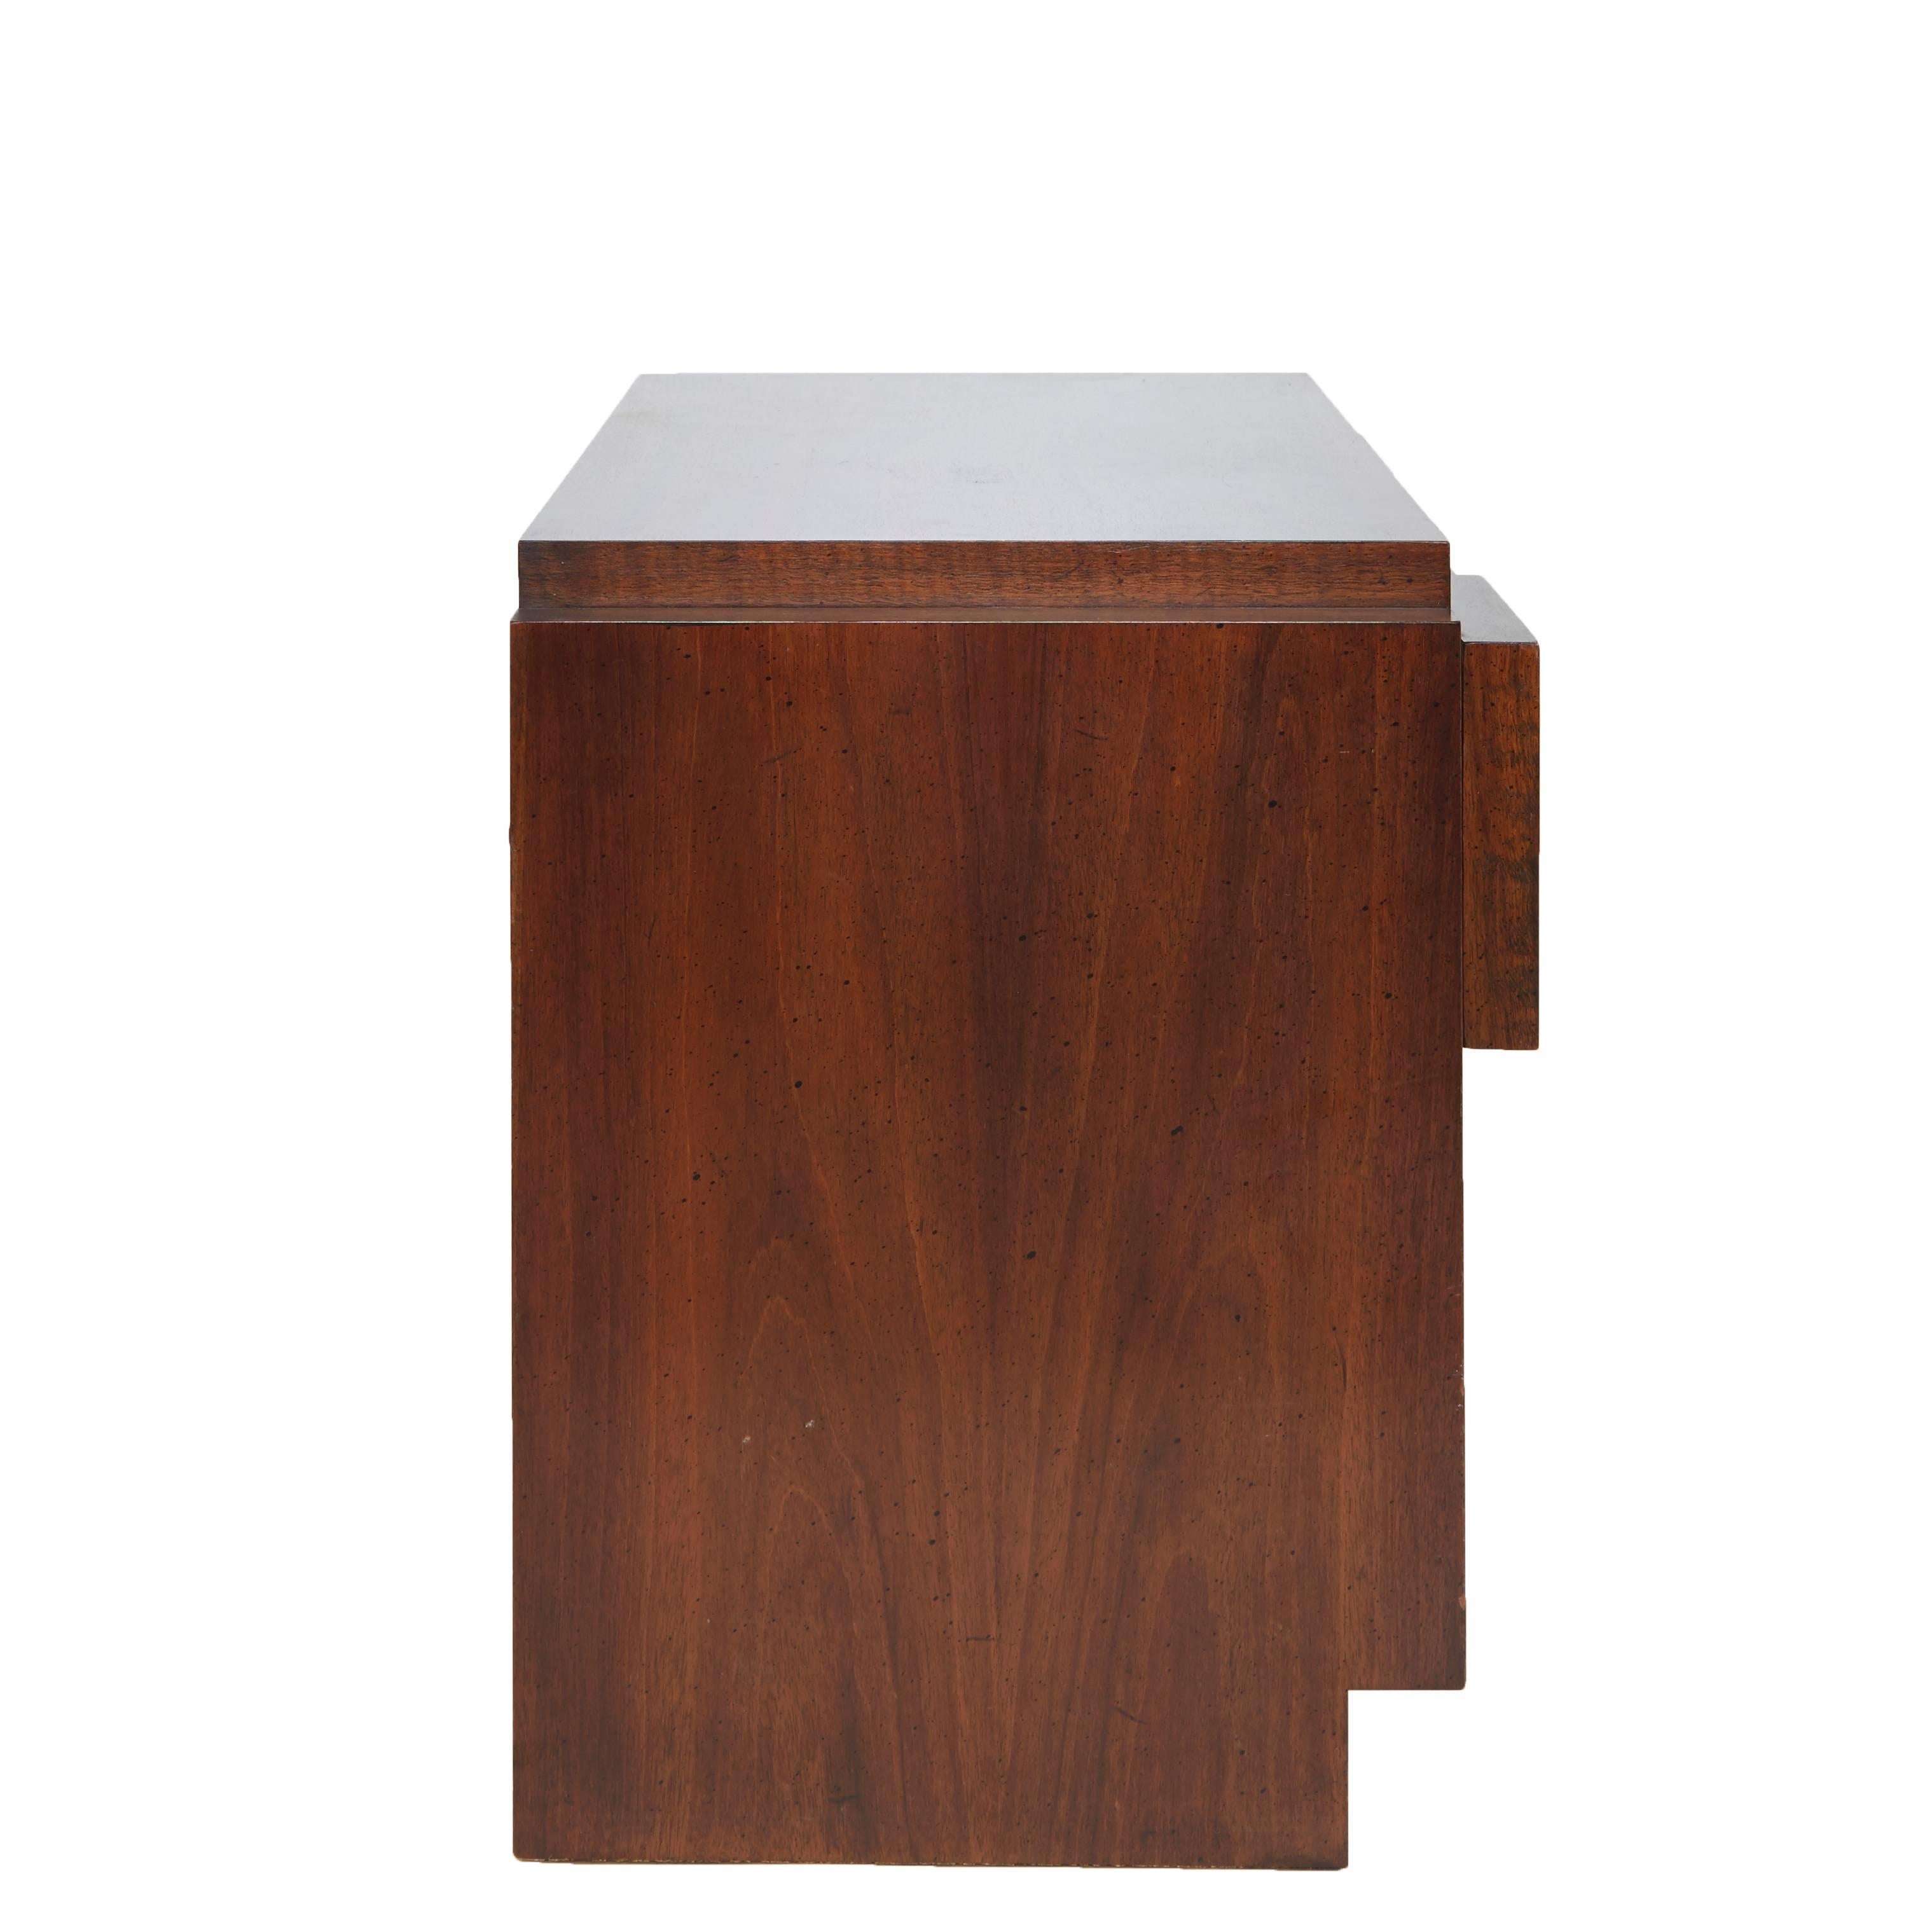 Mid-20th Century Lane Brutalist Nightstand or End Table